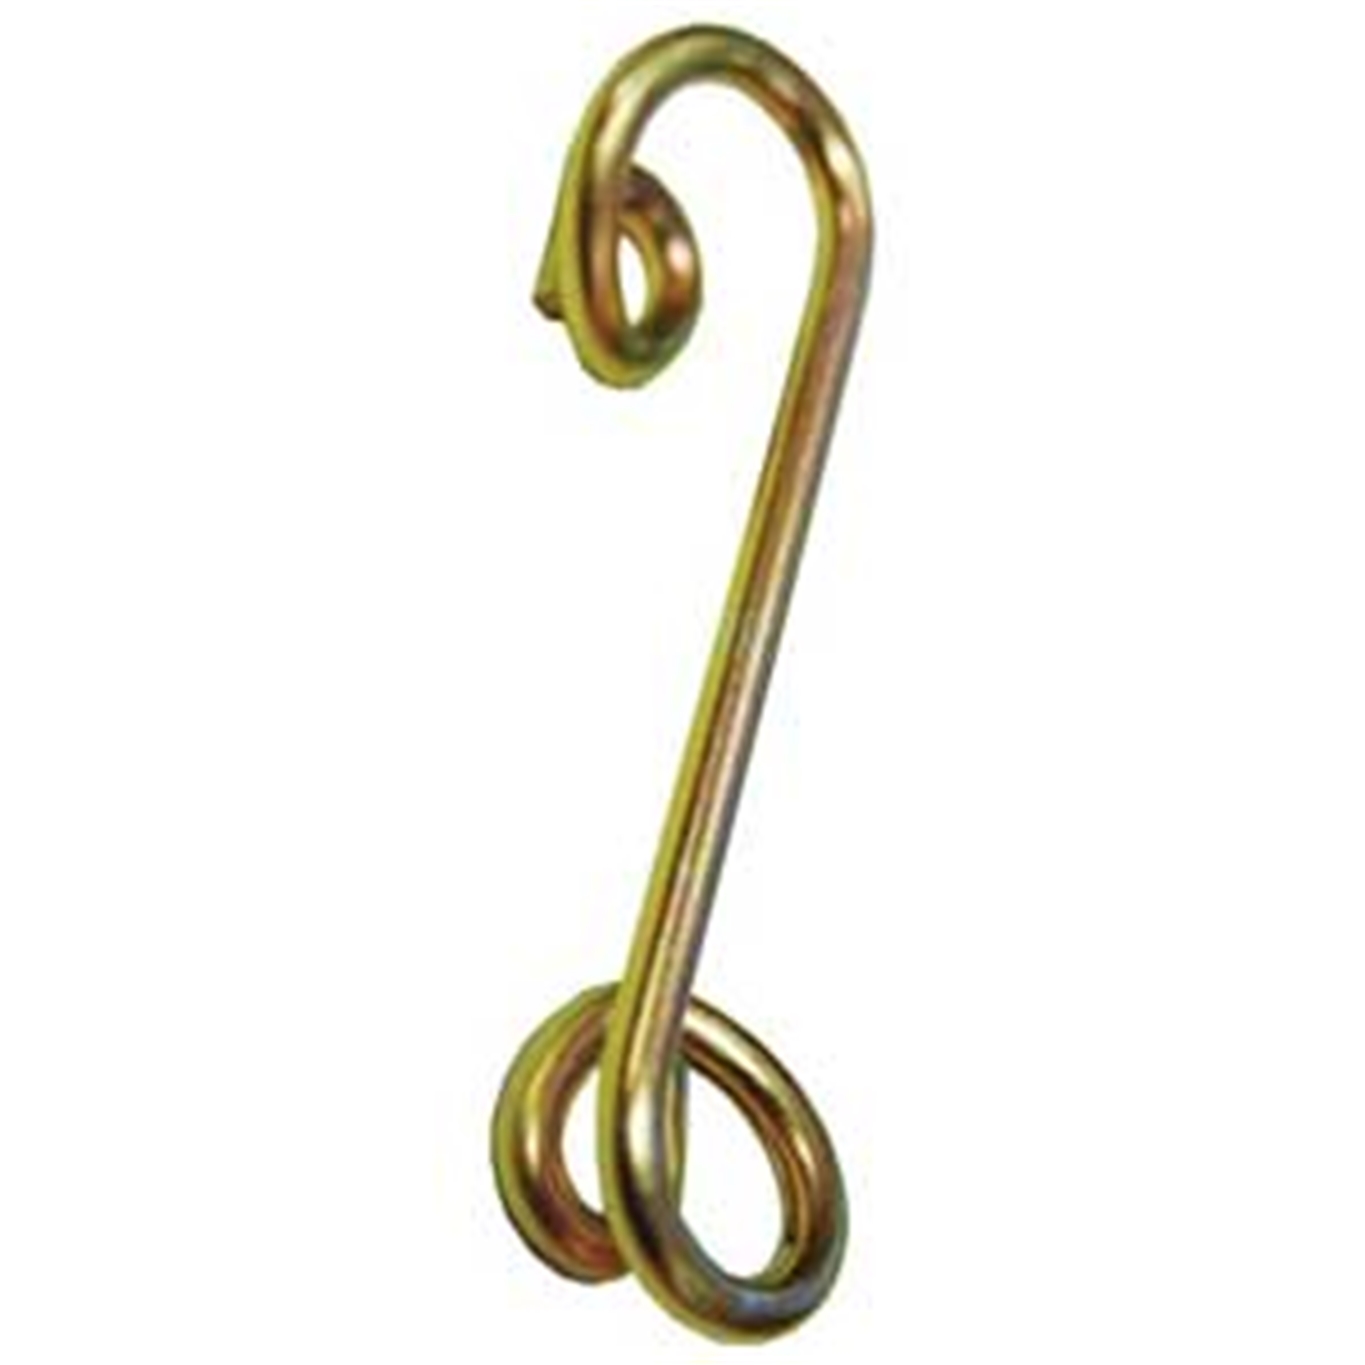 Gold Color 1.375" Panelfast Spring .275" Height